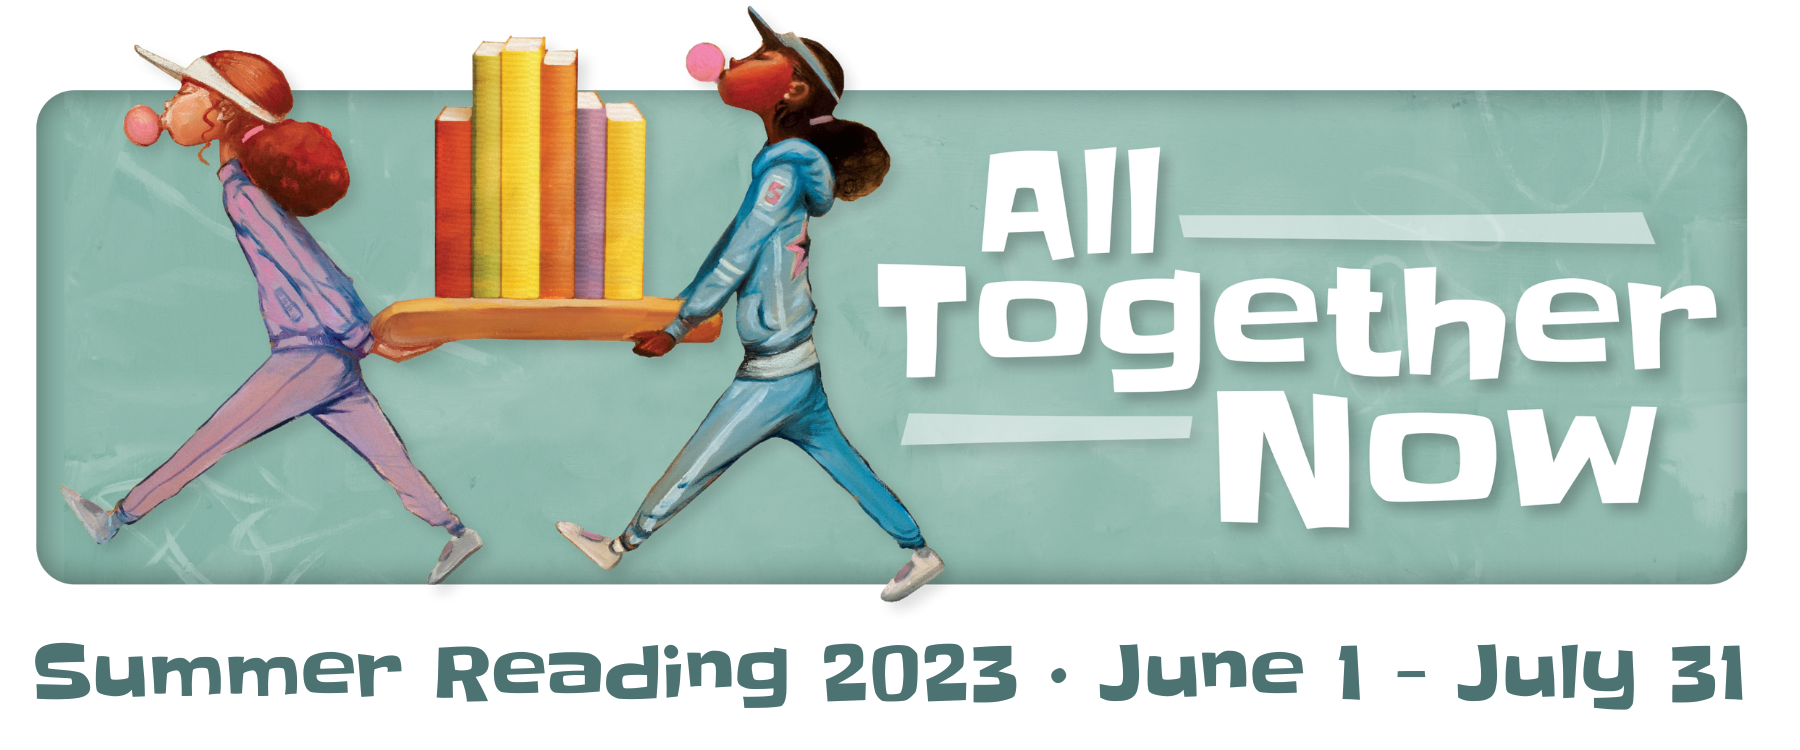 Summer Reading 2023: June 1st to July 31st